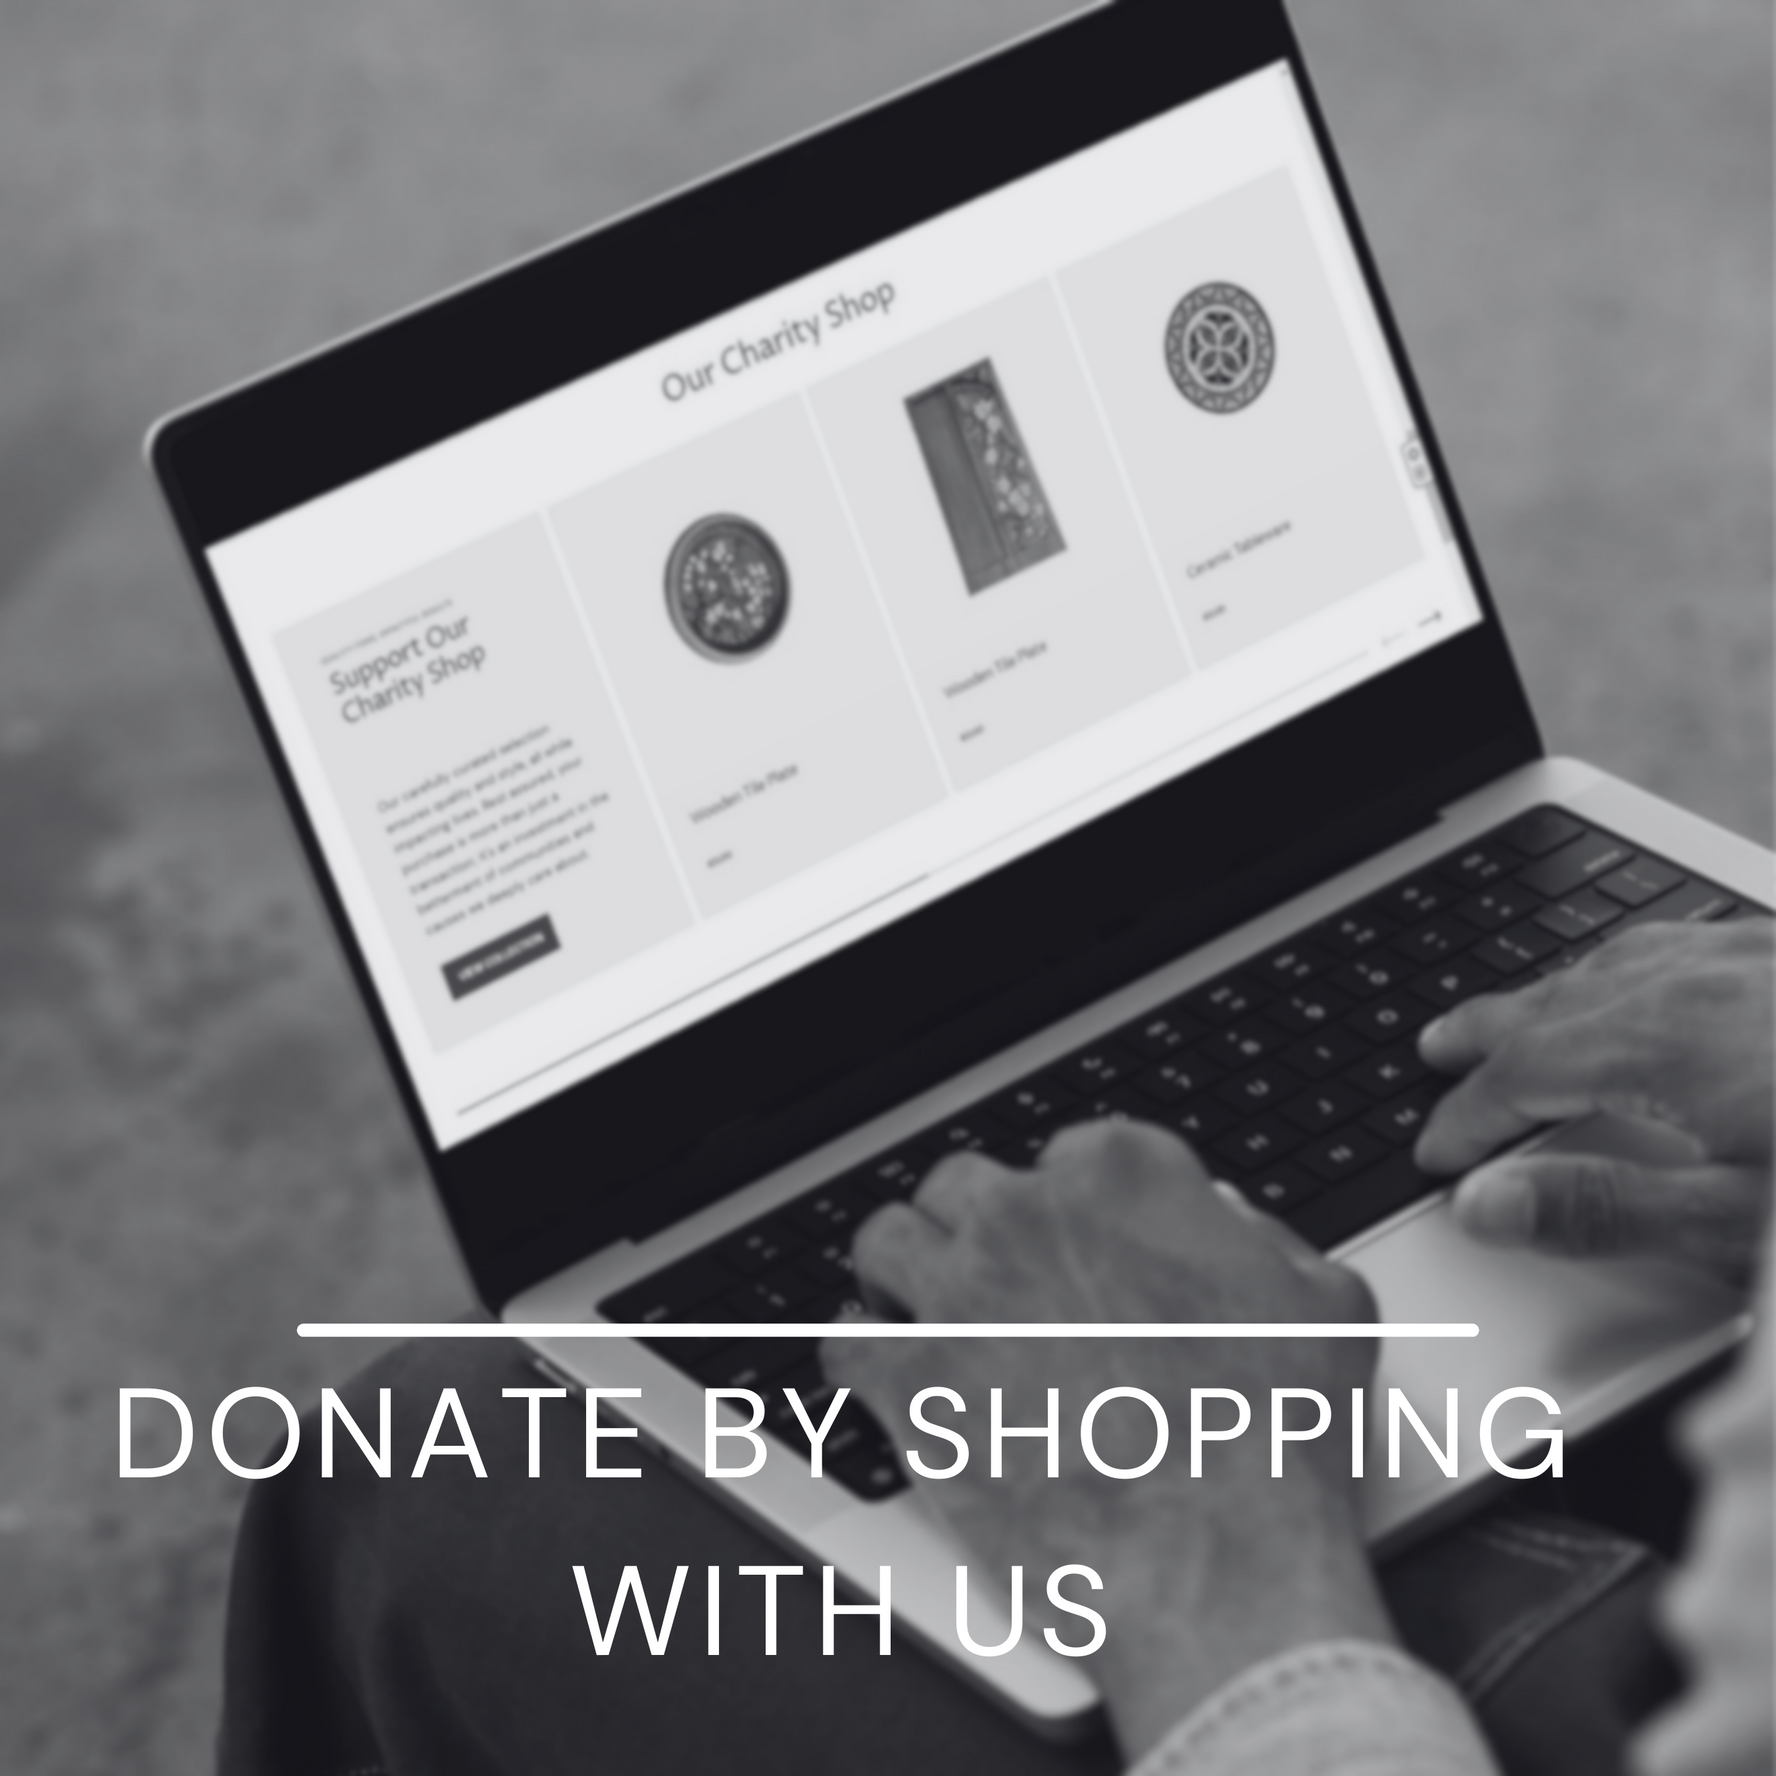 DONATE BY SHOPPING WITH US